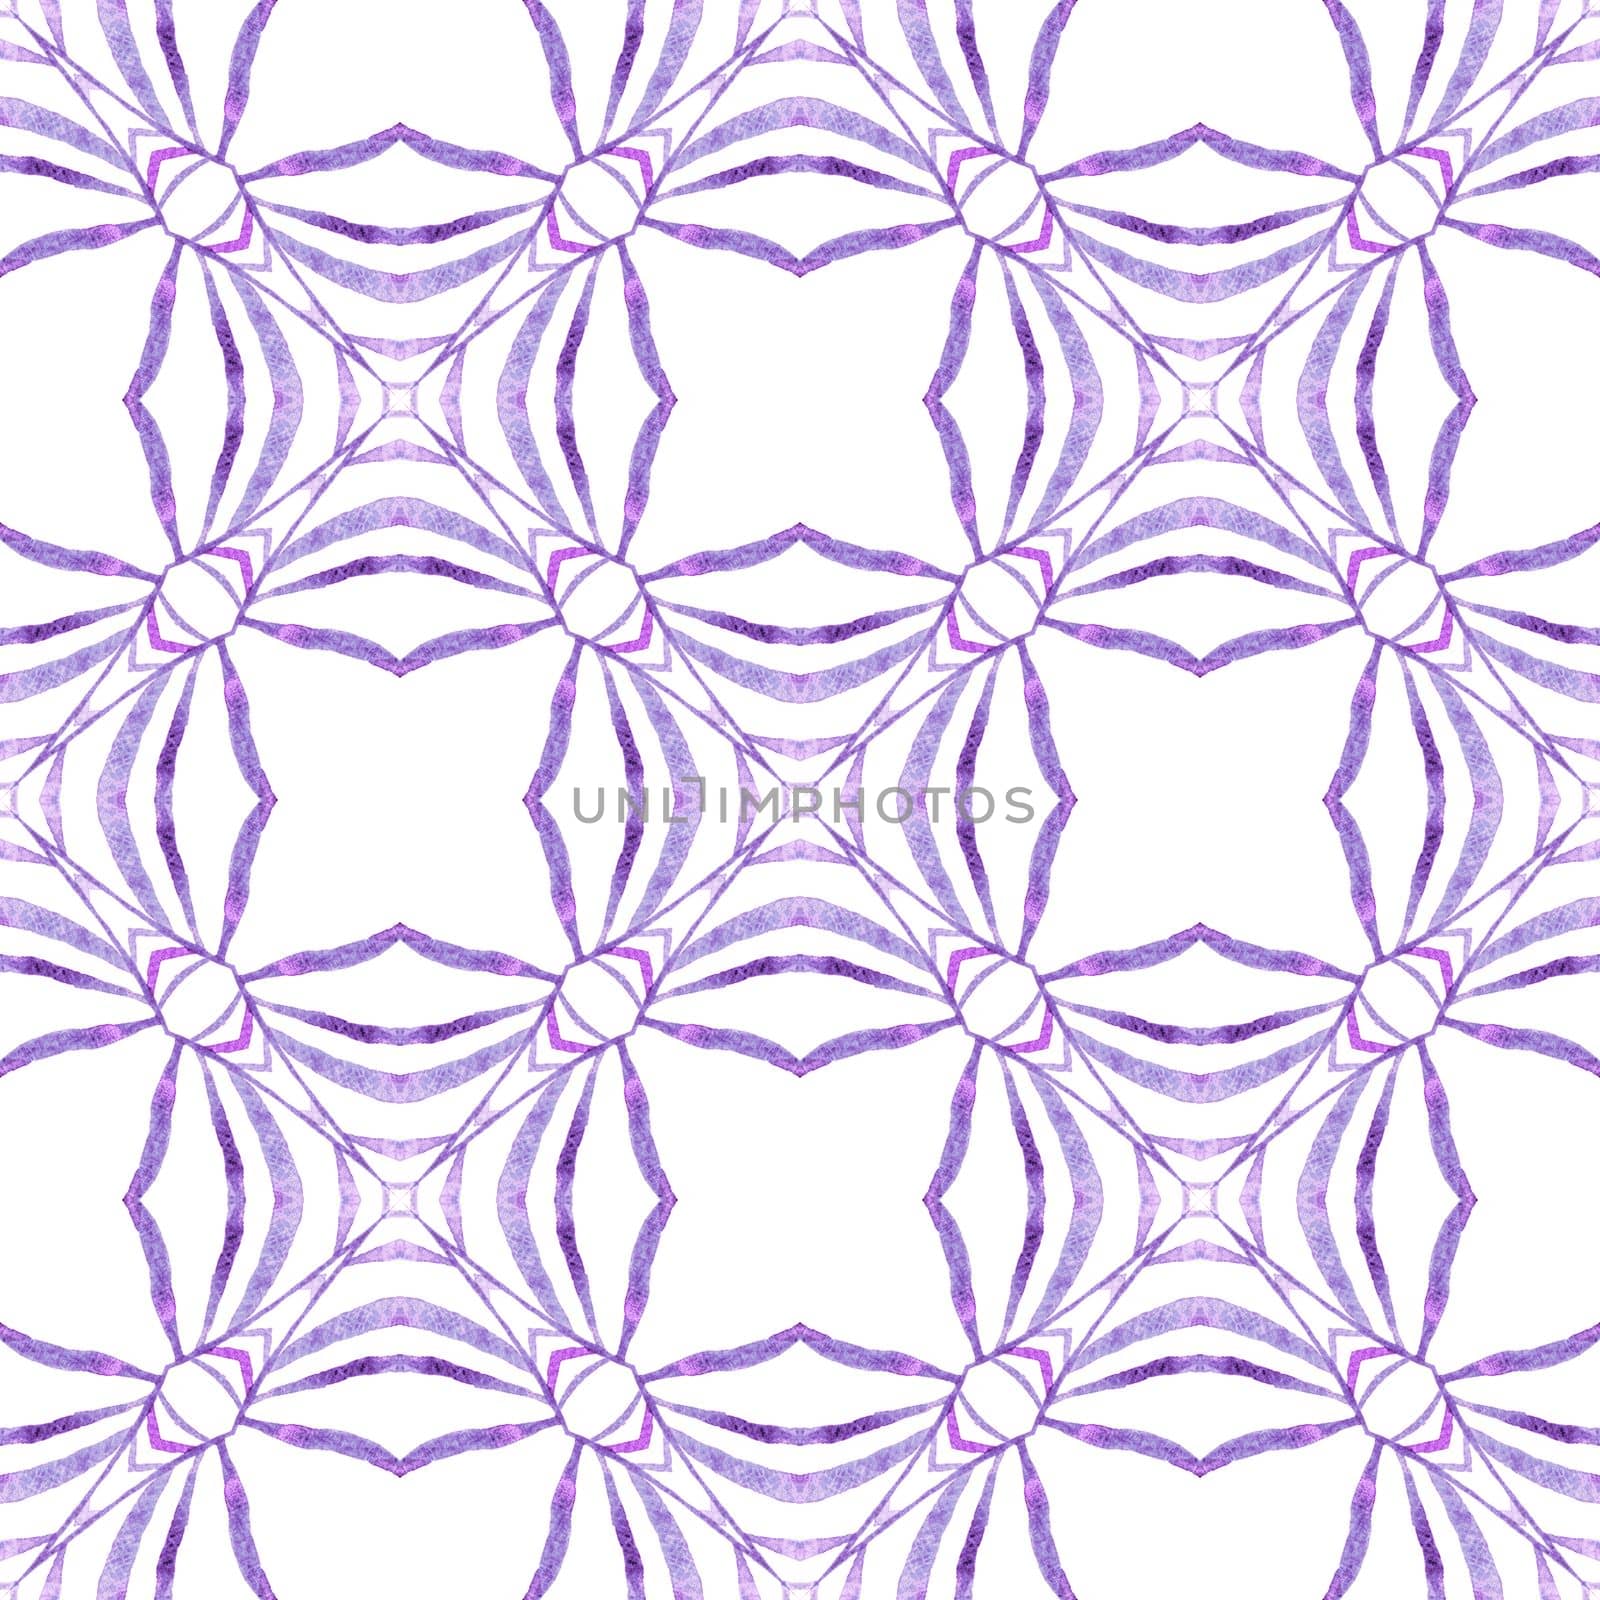 Hand drawn tropical seamless border. Purple outstanding boho chic summer design. Tropical seamless pattern. Textile ready extra print, swimwear fabric, wallpaper, wrapping.